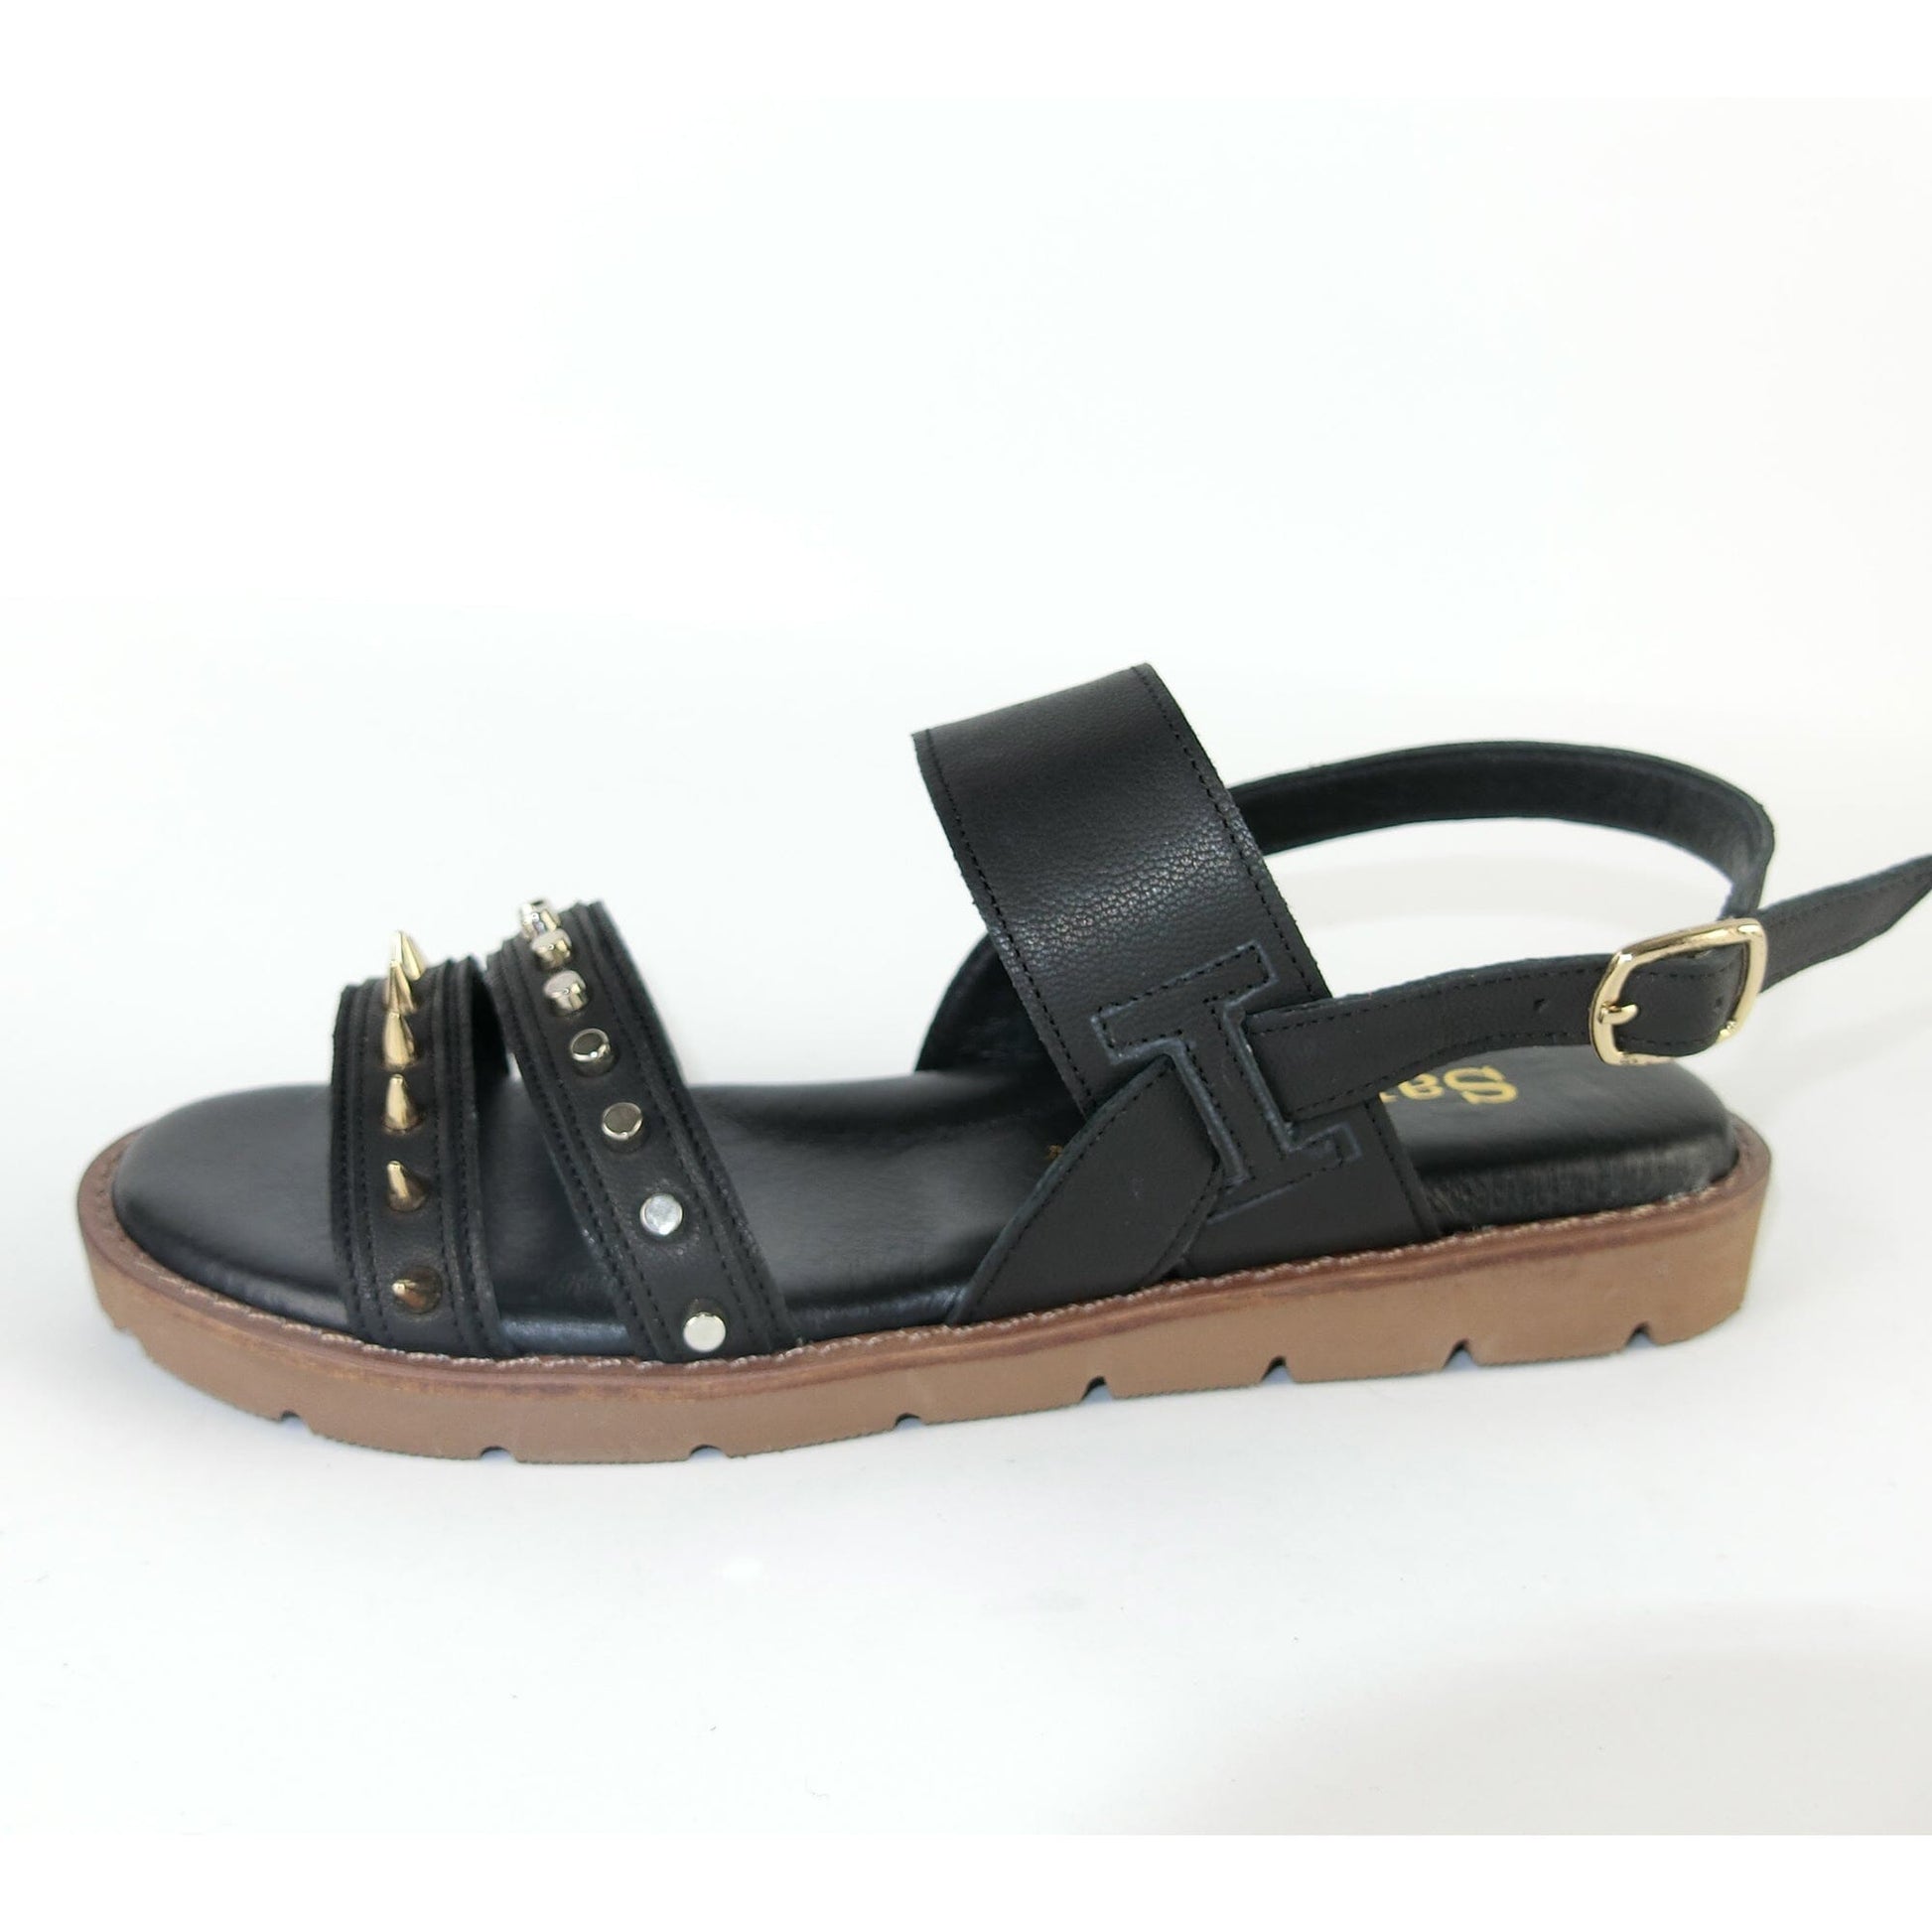 SS22018/19 Leather flat sandals with studs detail Sam Star Shoes Black 4 (37) 